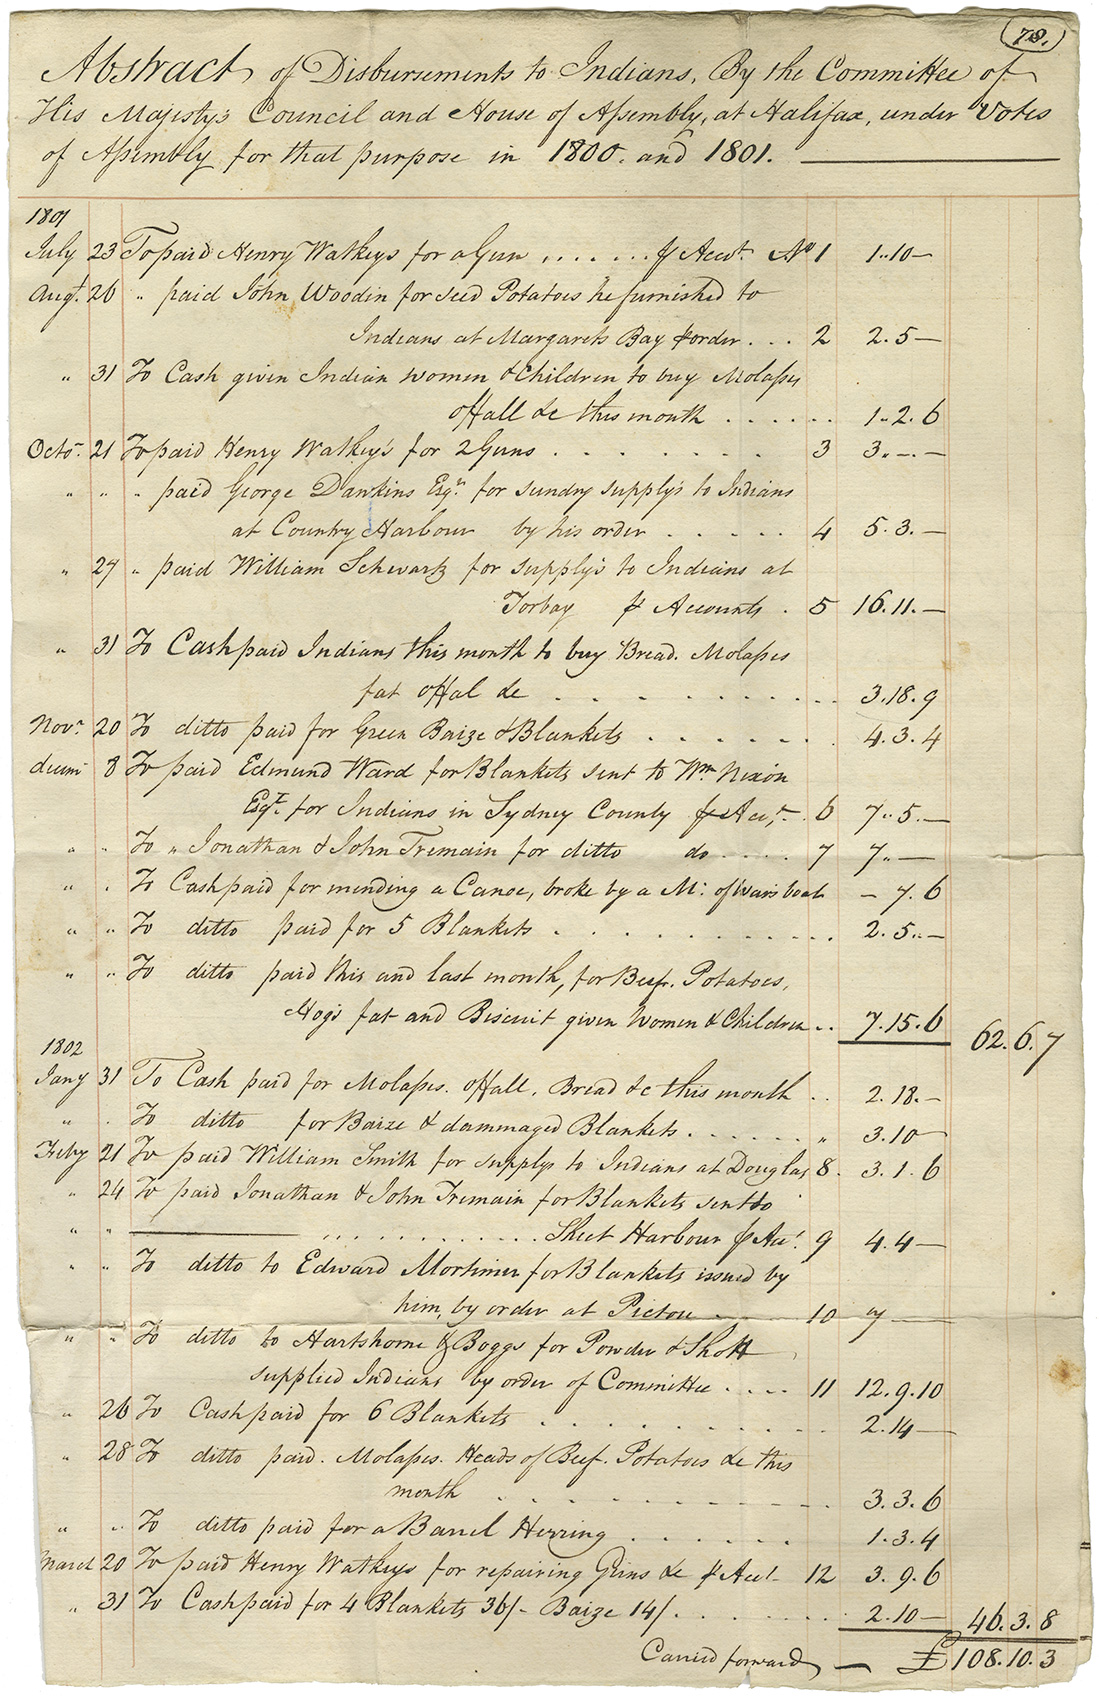 mikmaq : Abstract of disbursements to Mikmaq by the Committee of His Majestys Council and House of Assembly. 1800 and 1801.